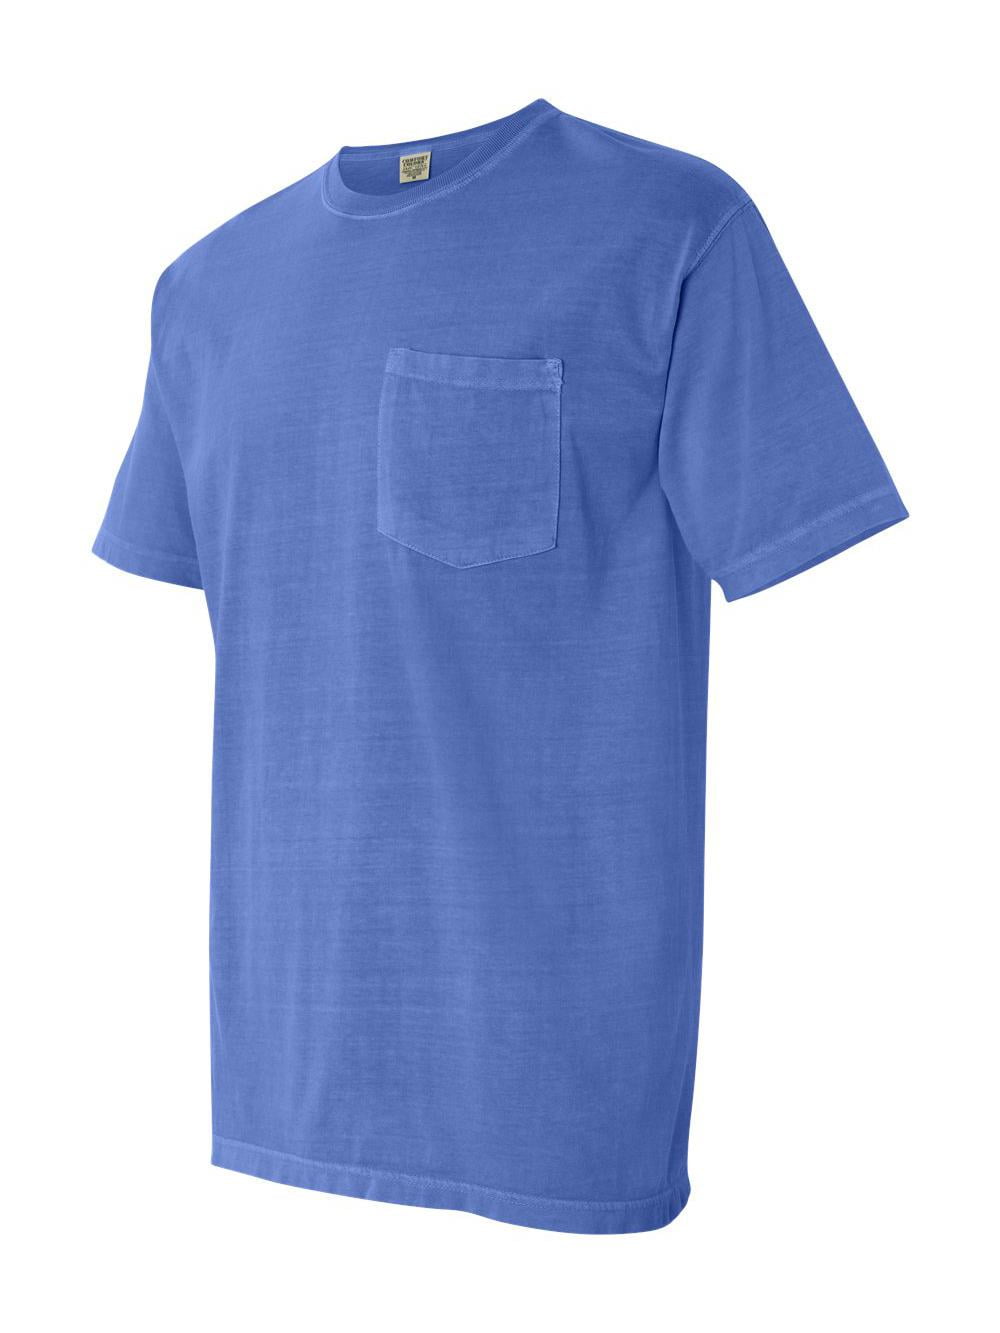 COMFORT COLORS - Comfort Colors - Garment-Dyed Heavyweight Pocket T ...